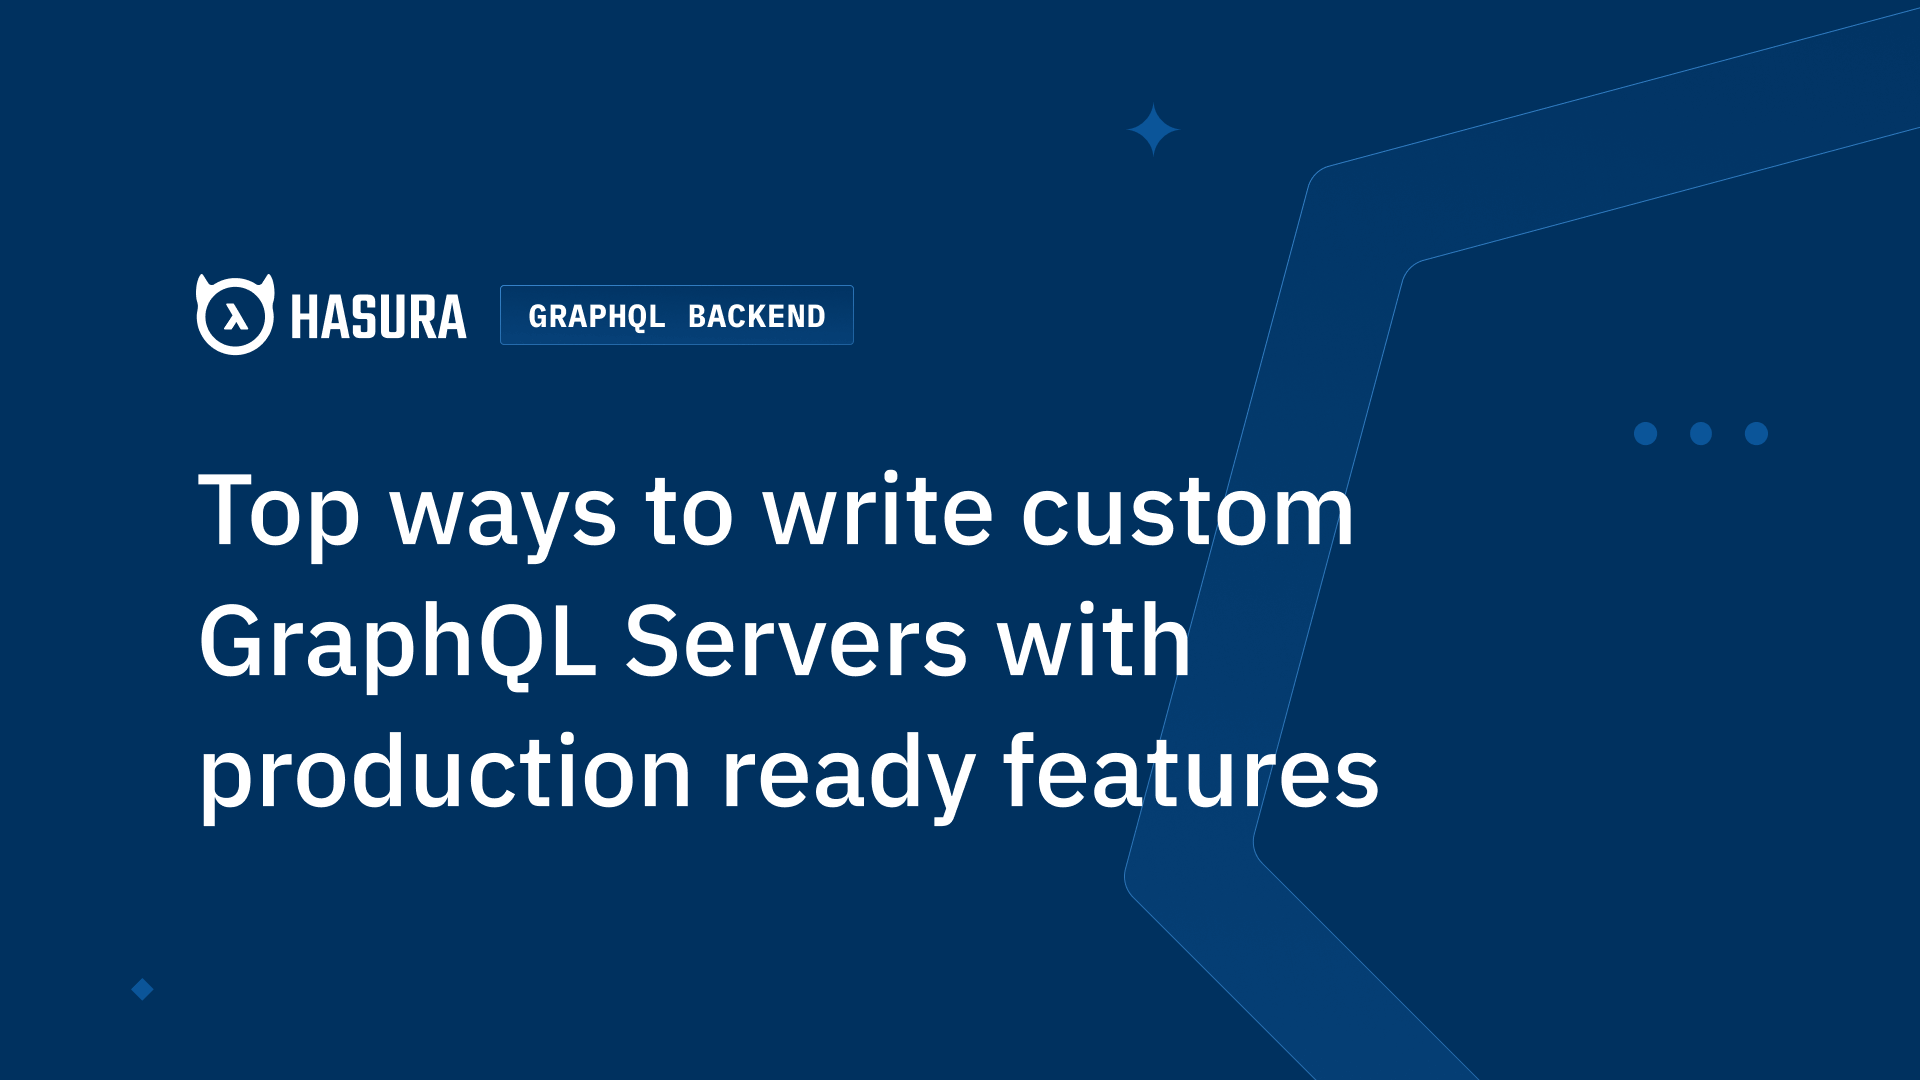 Top ways to write a custom GraphQL Server with production ready features